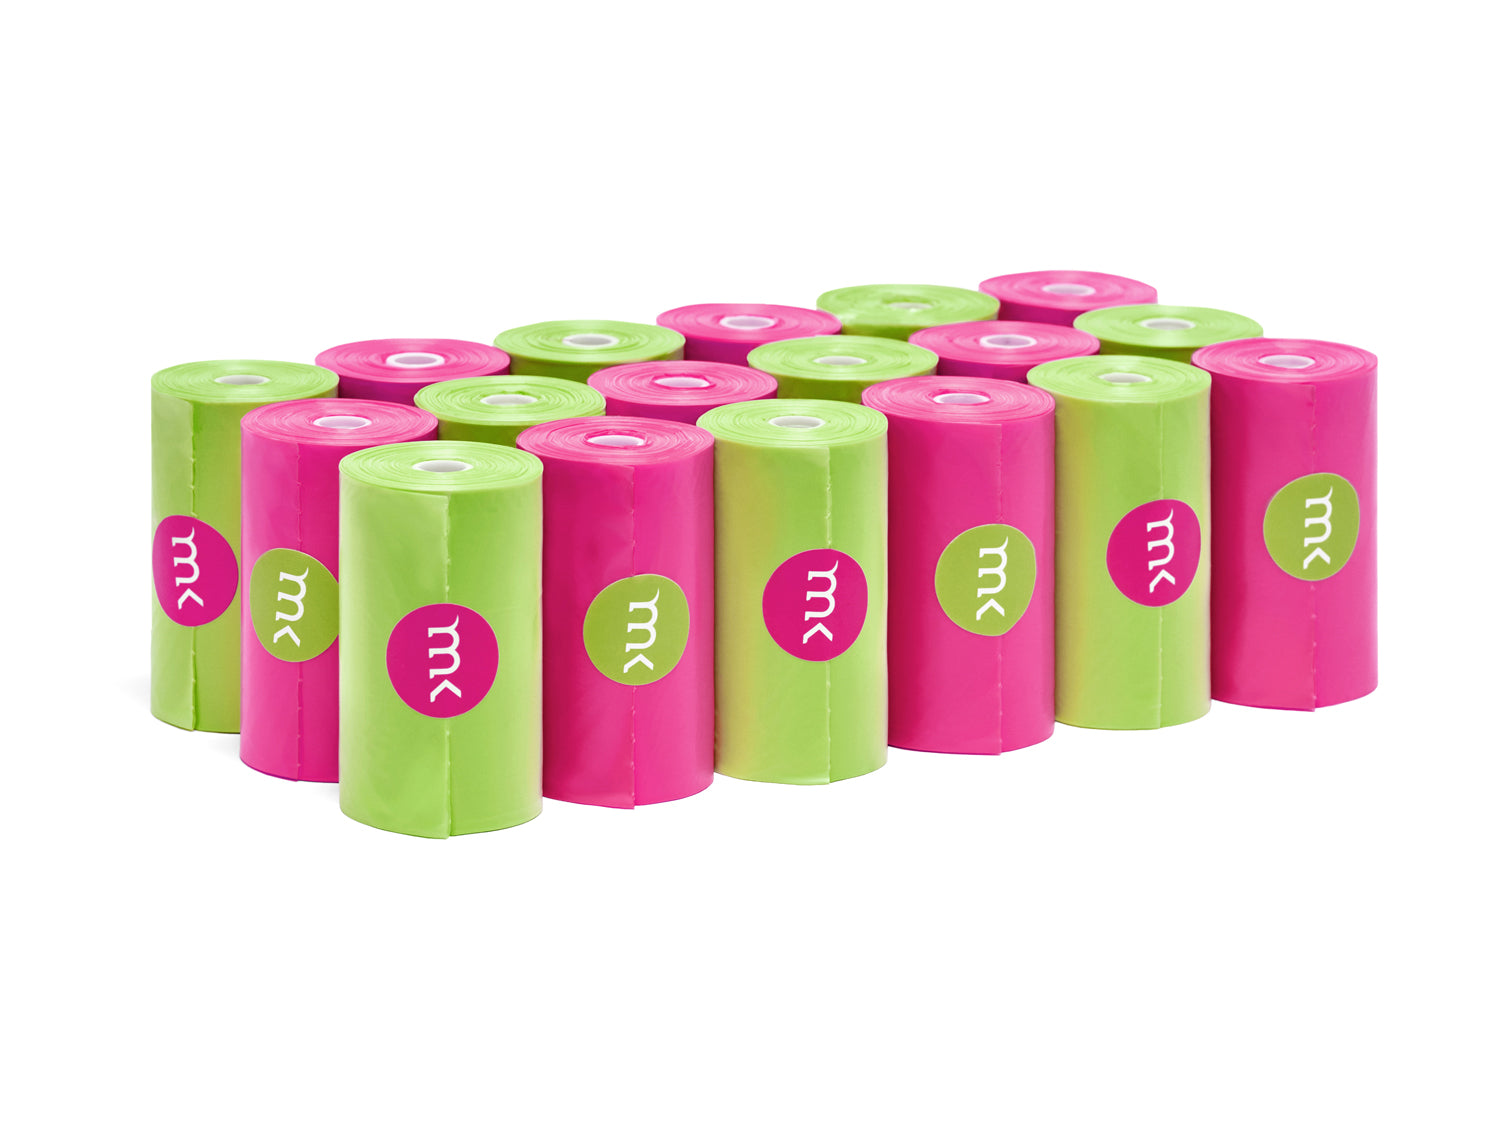 400-Count Modern Kanine® Dog Waste Bags, with 20 refill rolls and 2 Dispensers in Green & Green Pink